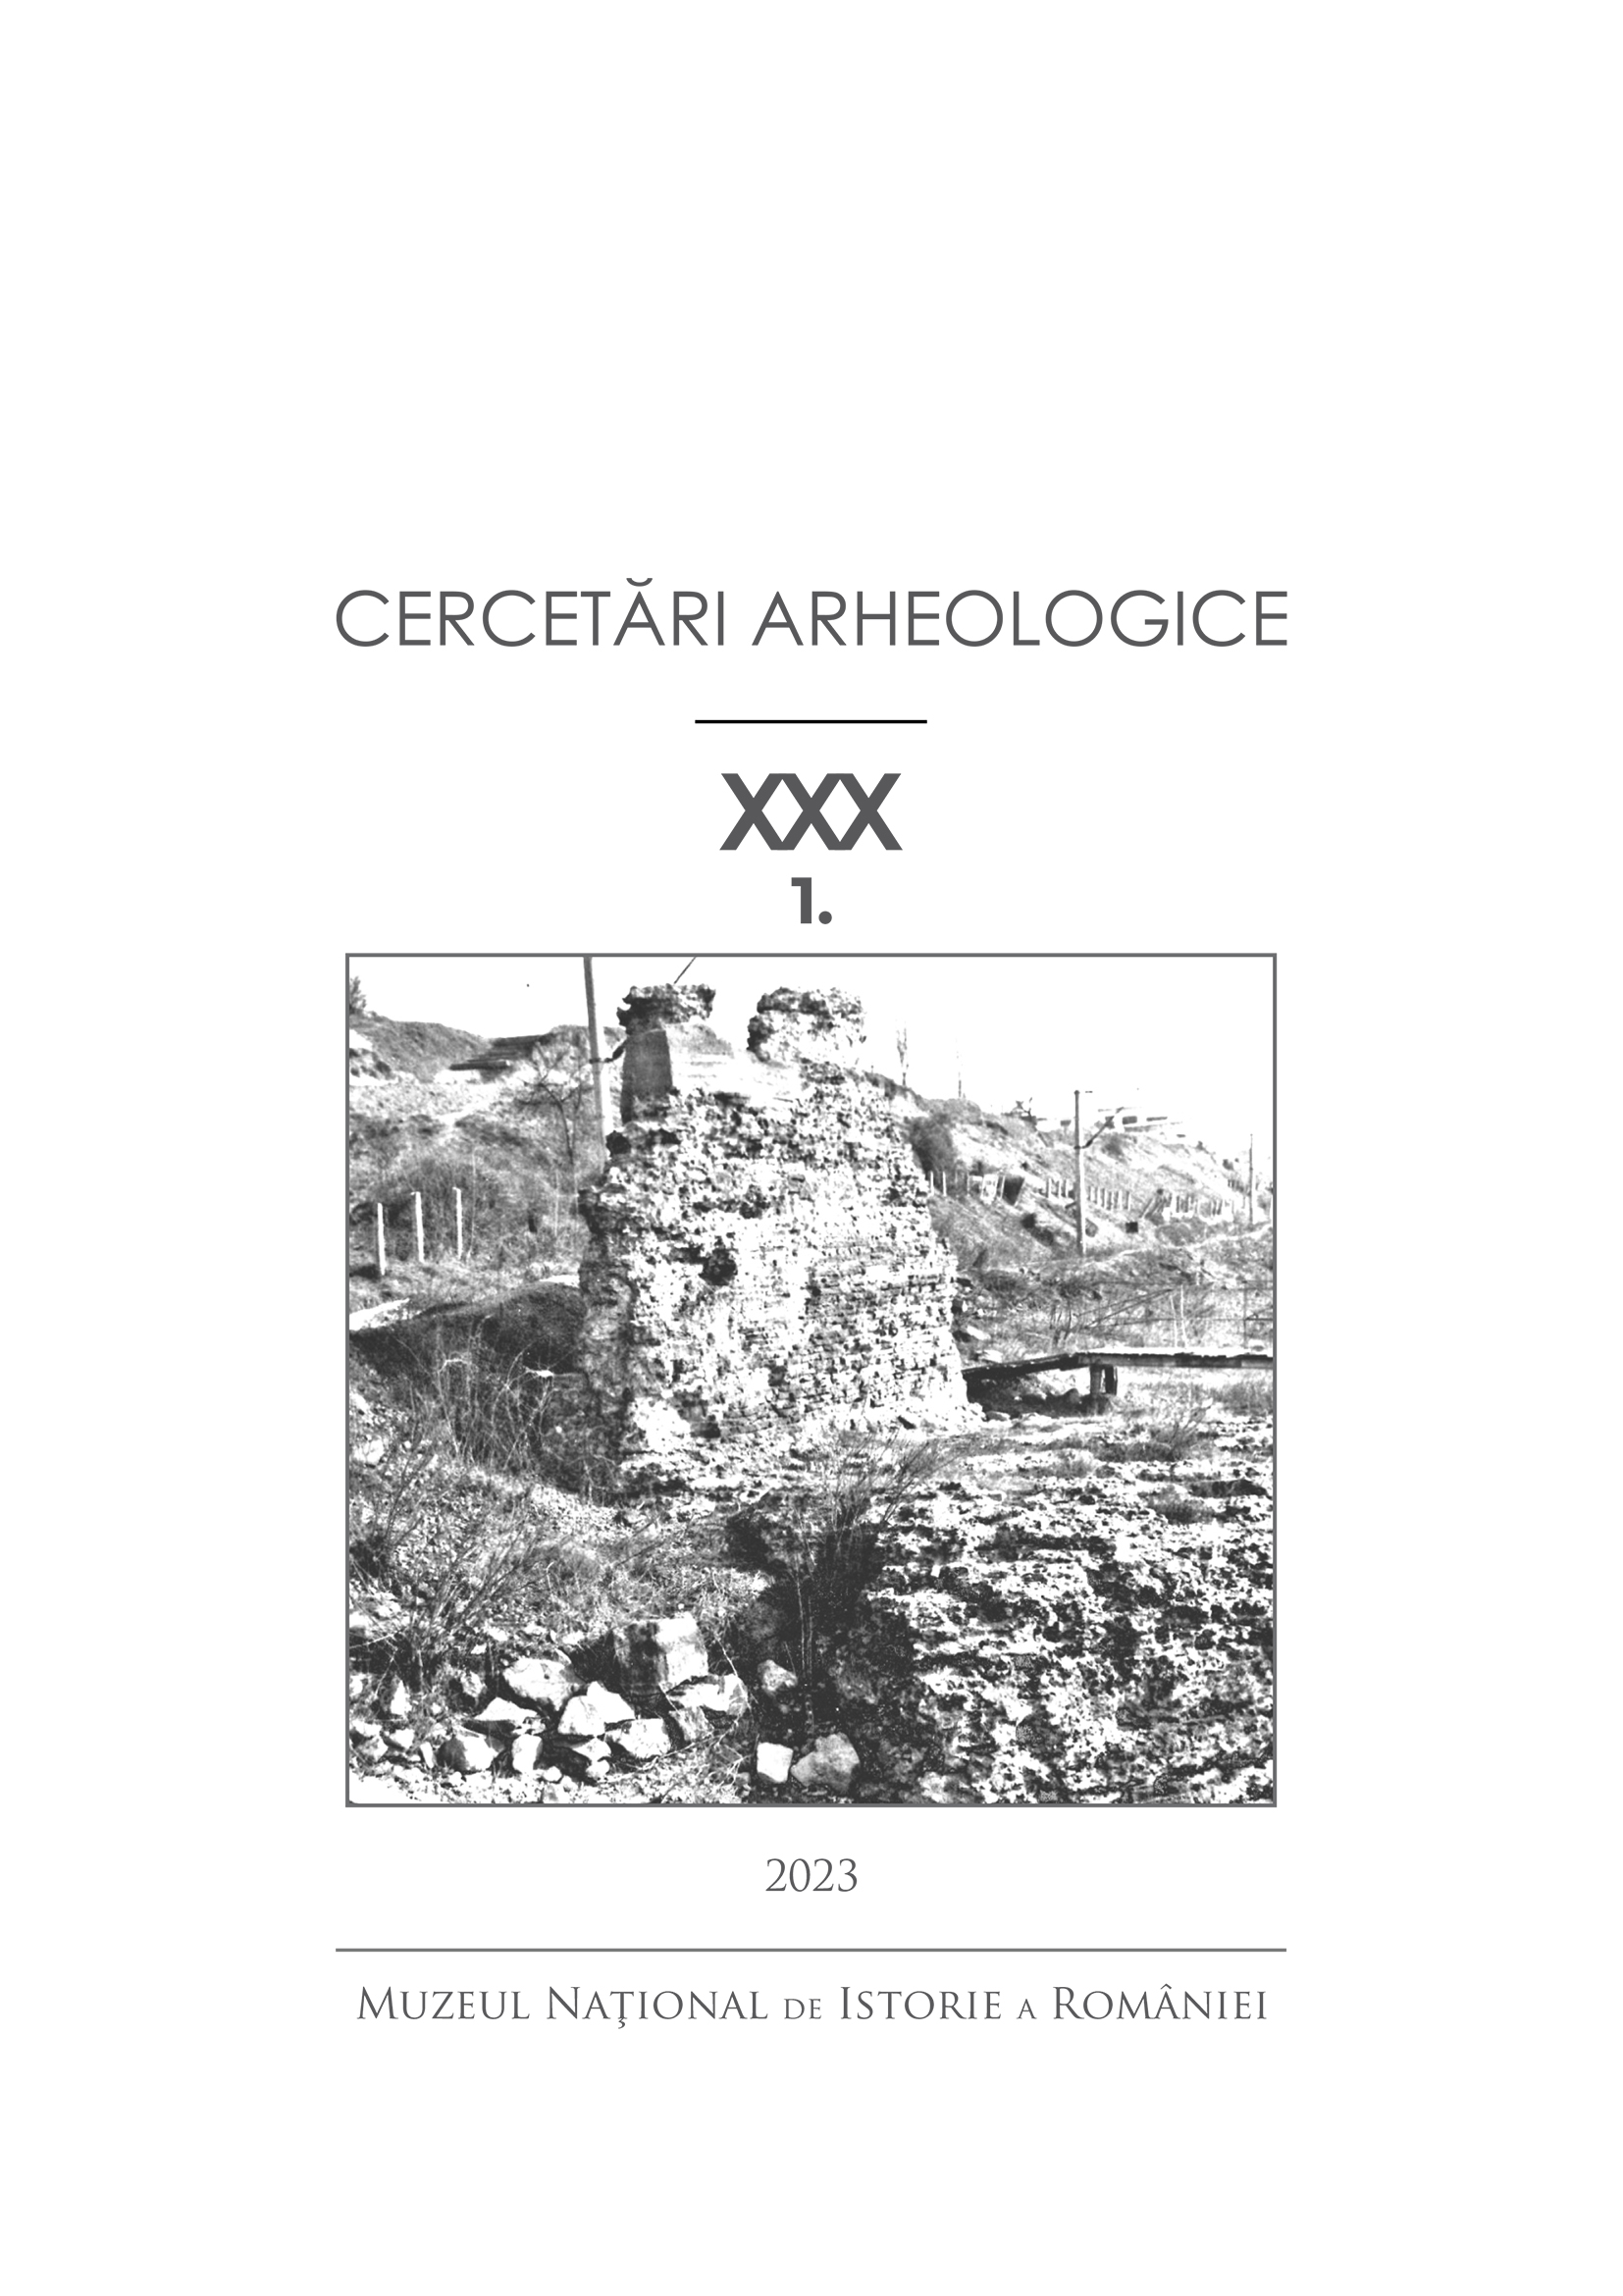 The study and analysis of Semiran City-Castle based on the results of archaeological surveys